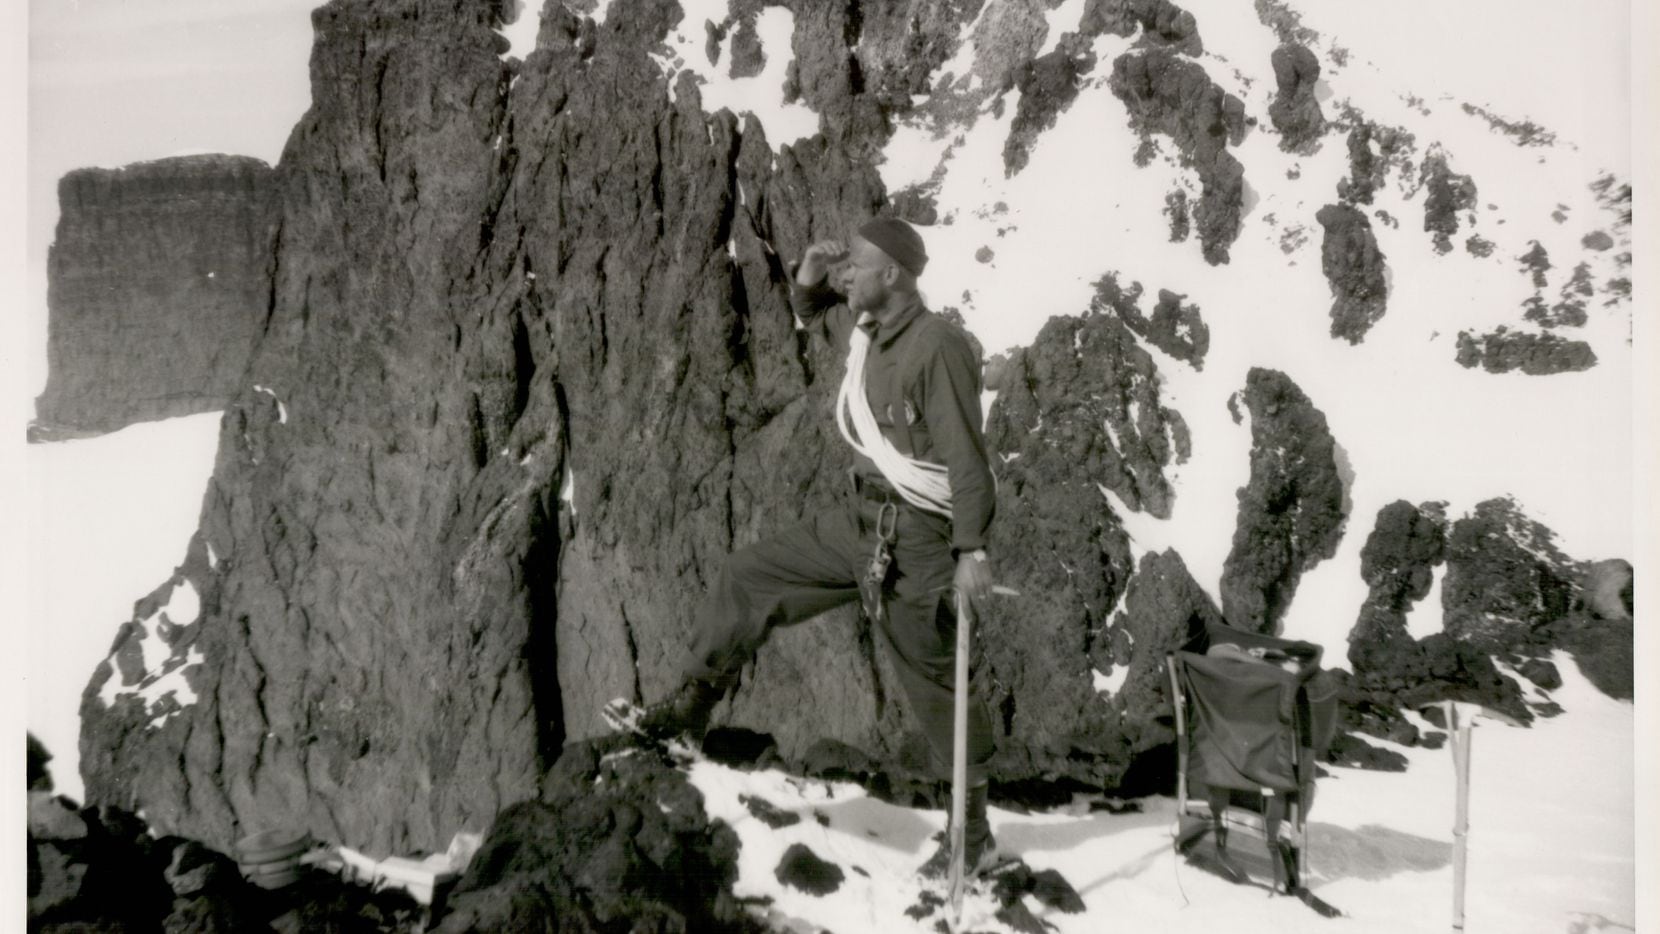 Robert H. Rutford was a geologist who explored Antarctica over several decades, and...